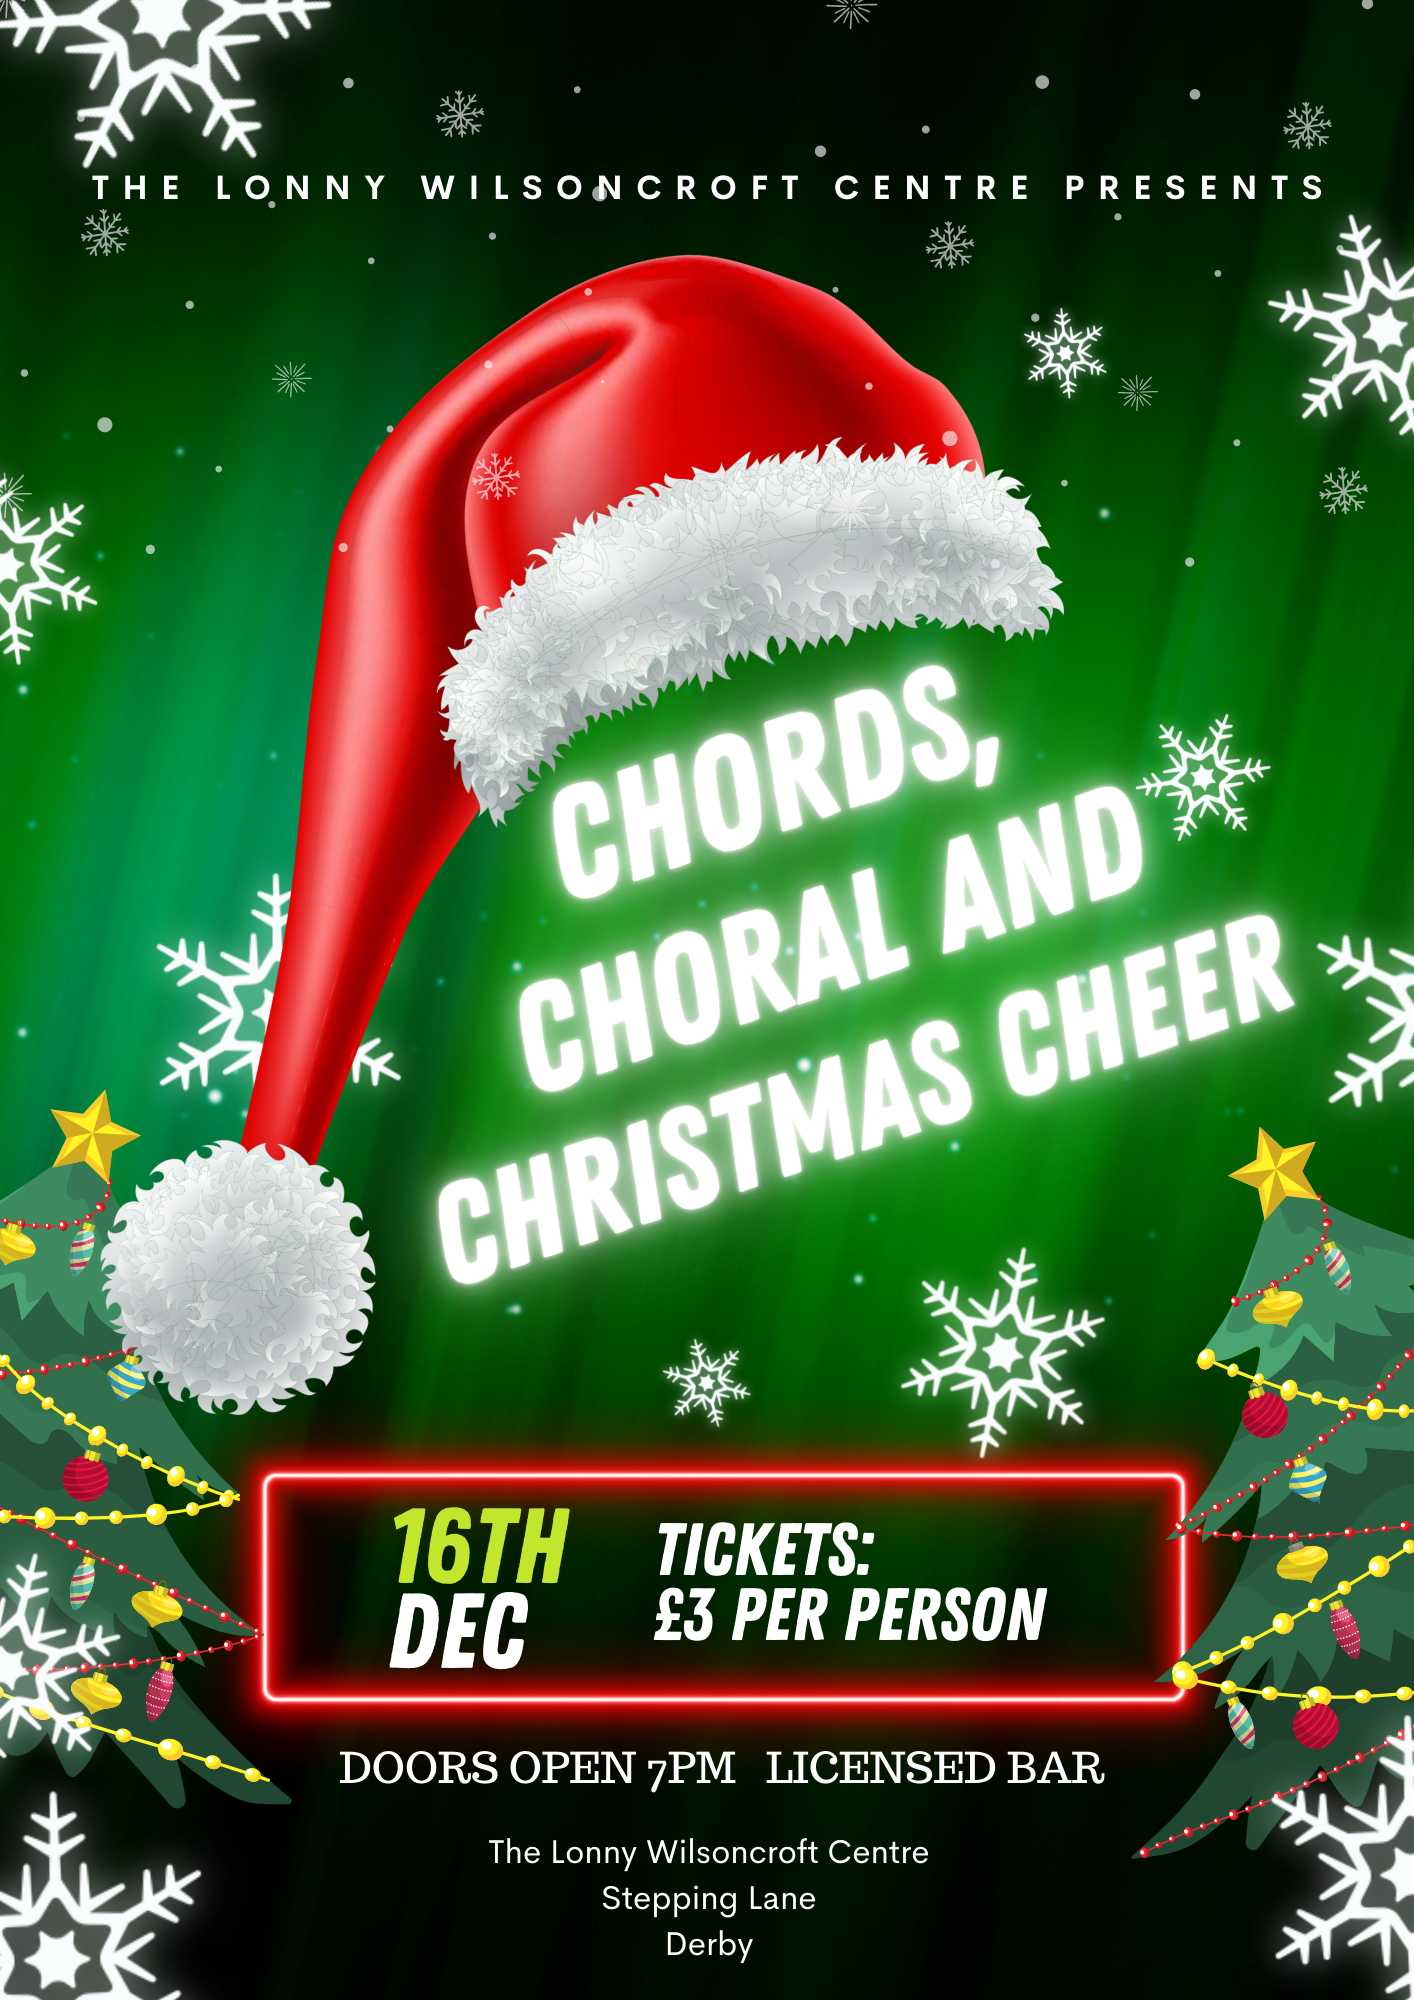 Chords%2C%20Choral%20and%20Christmas%20Cheer